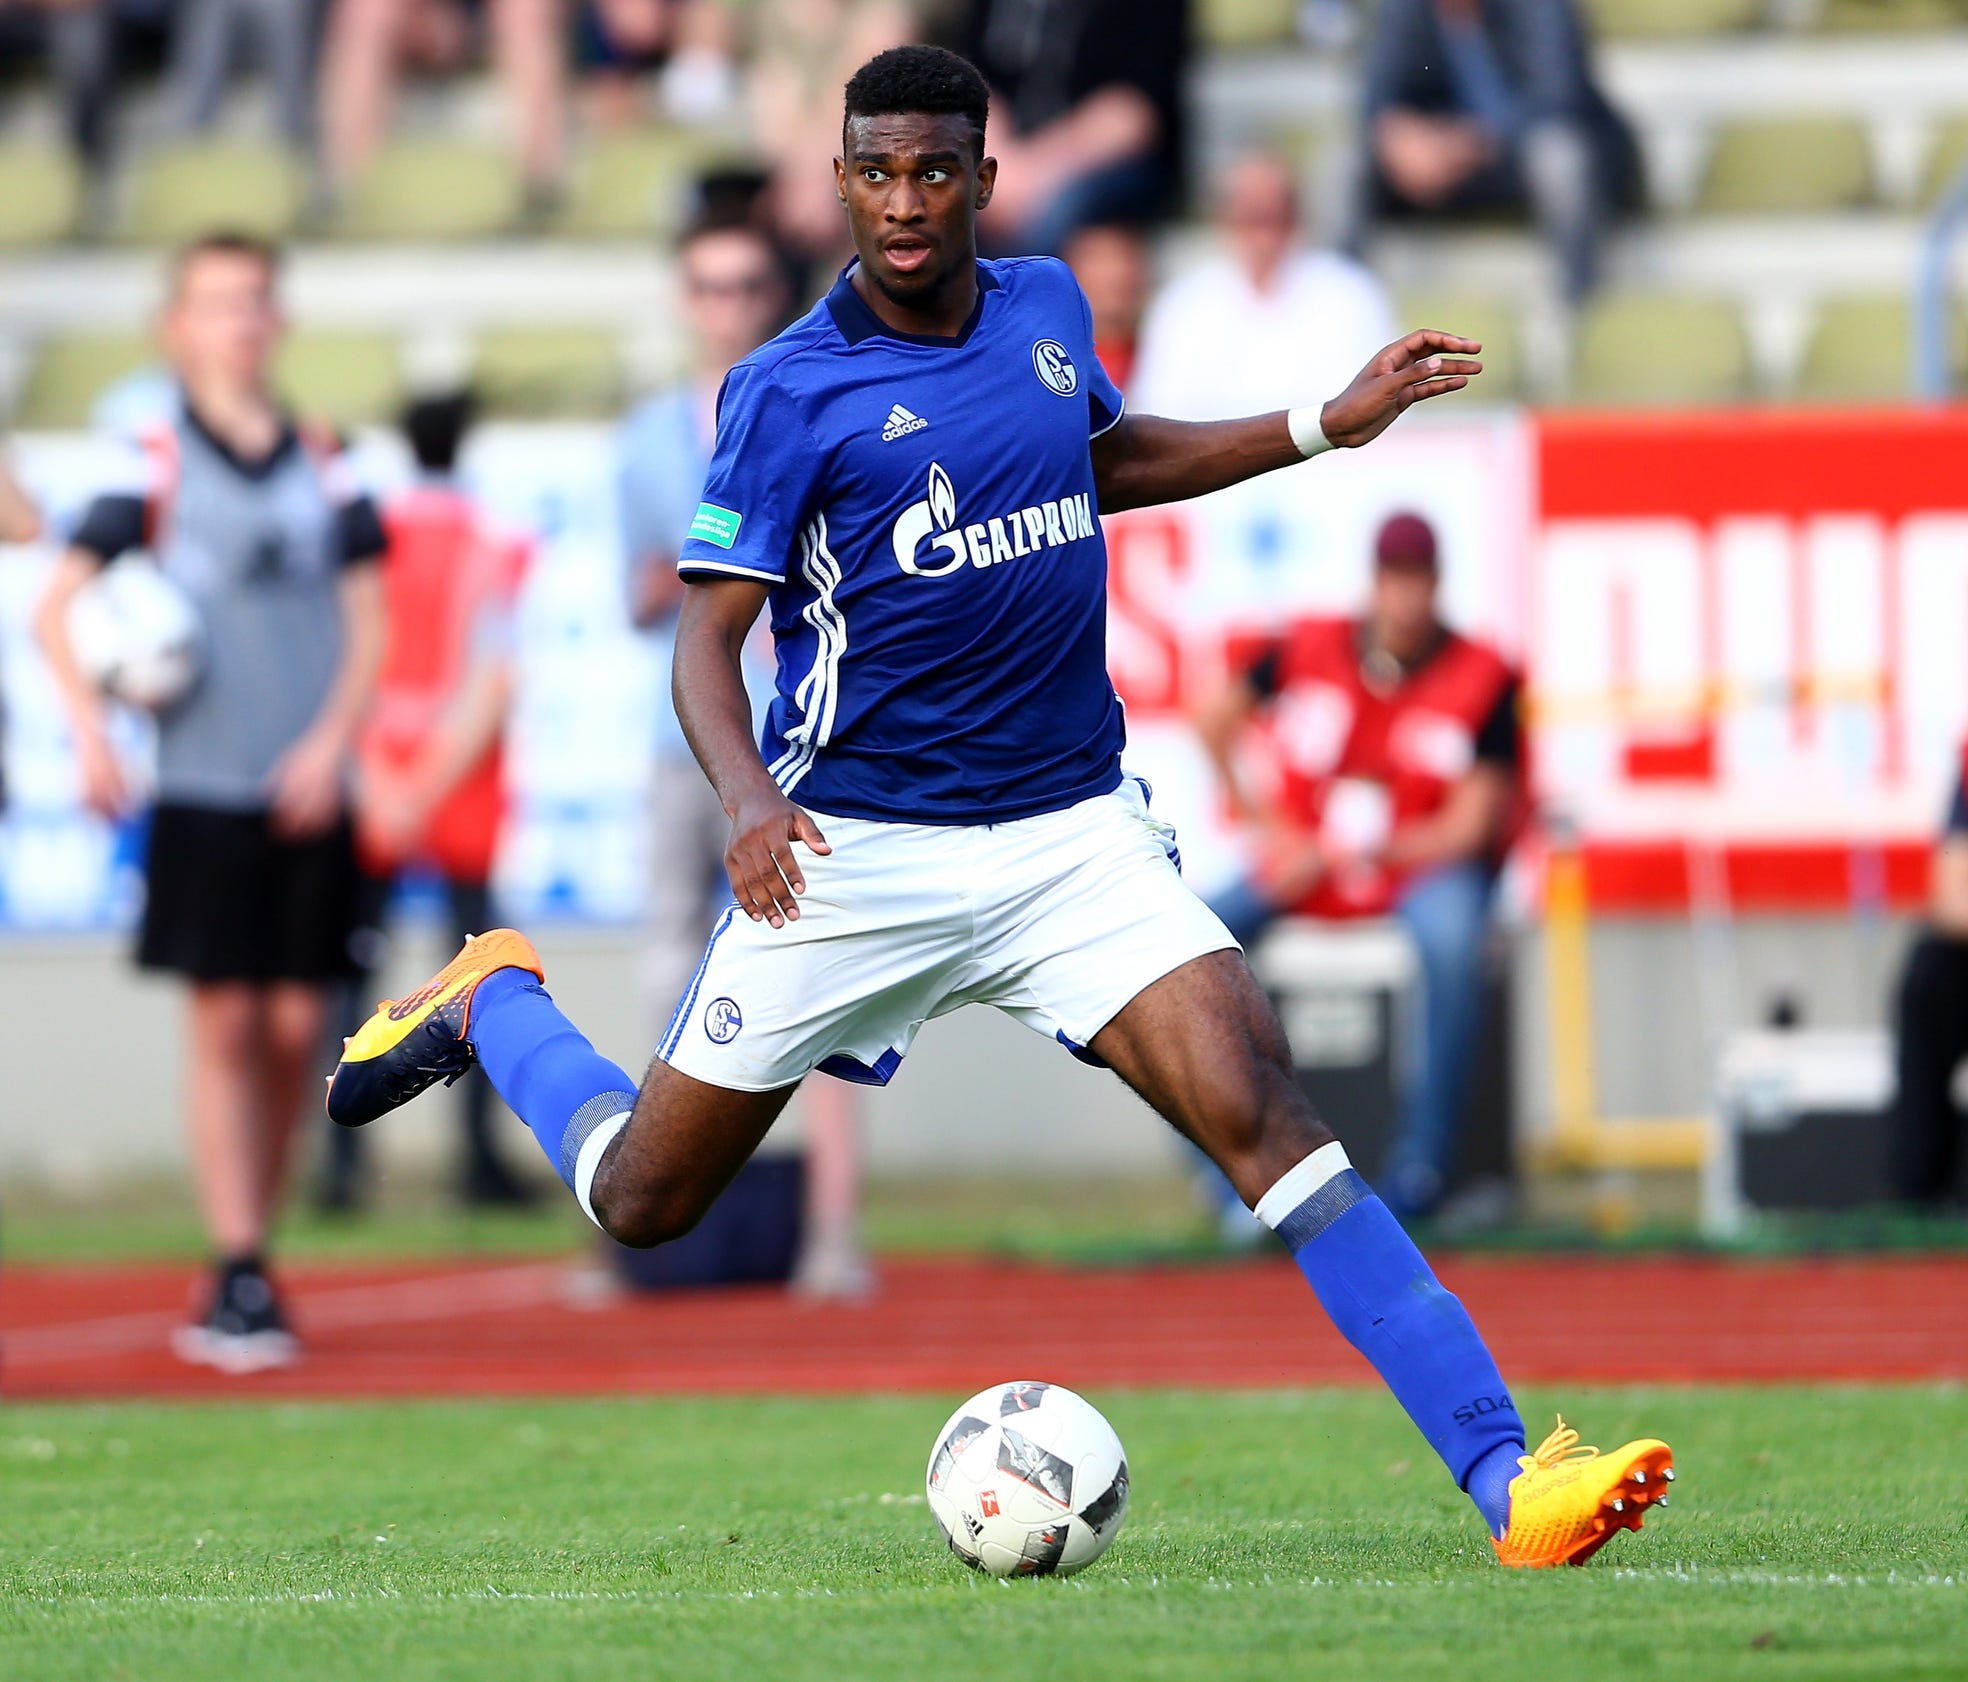 Haji Wright, playing with Schalke's U19 team, hopes to get playing time with the senior team next season.